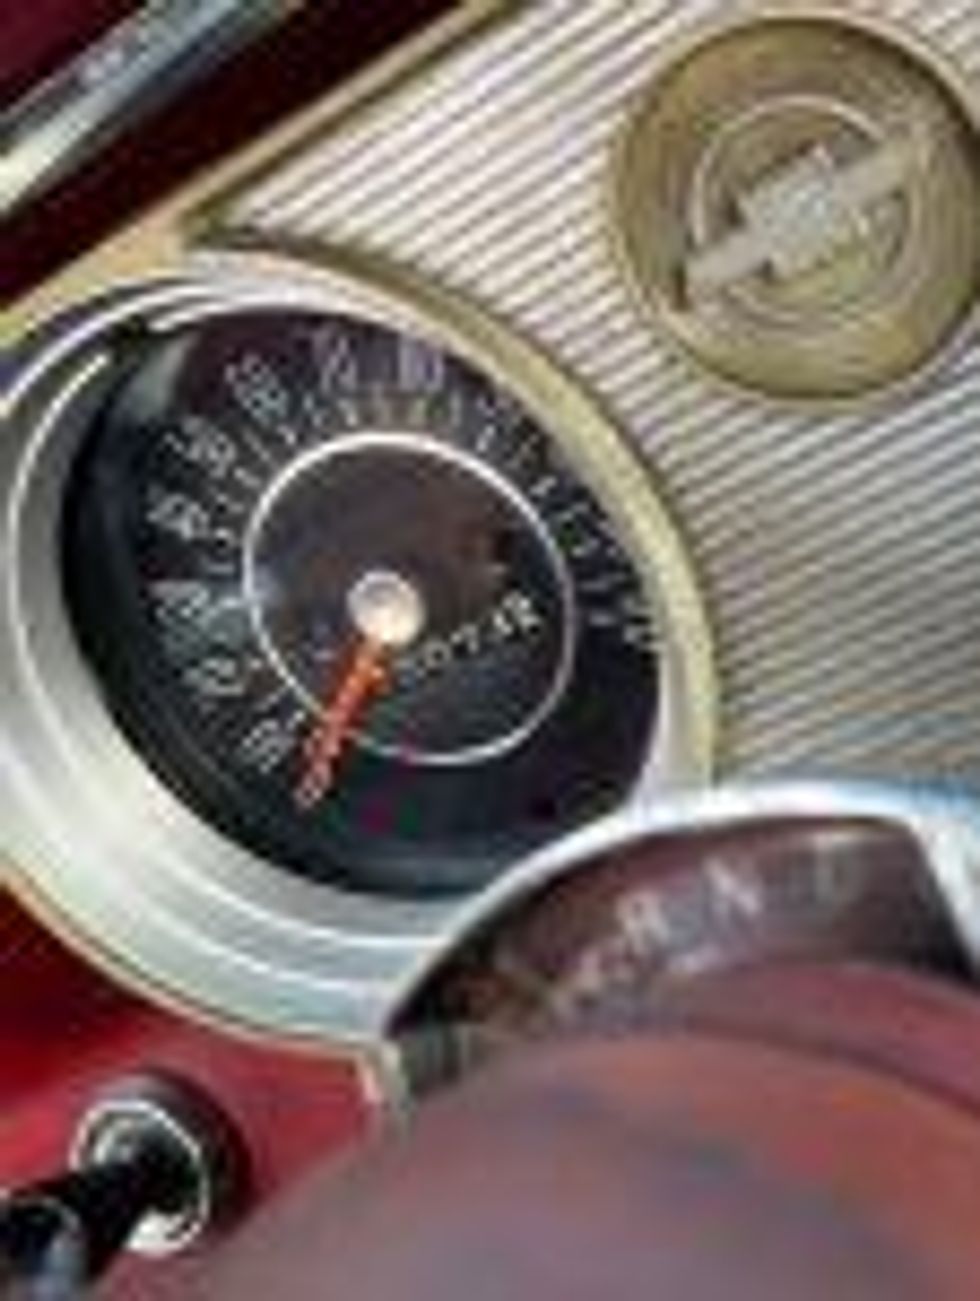 Close-up shot of the speedometer and shift quadrant of a 1962 Chevrolet Chevy II.